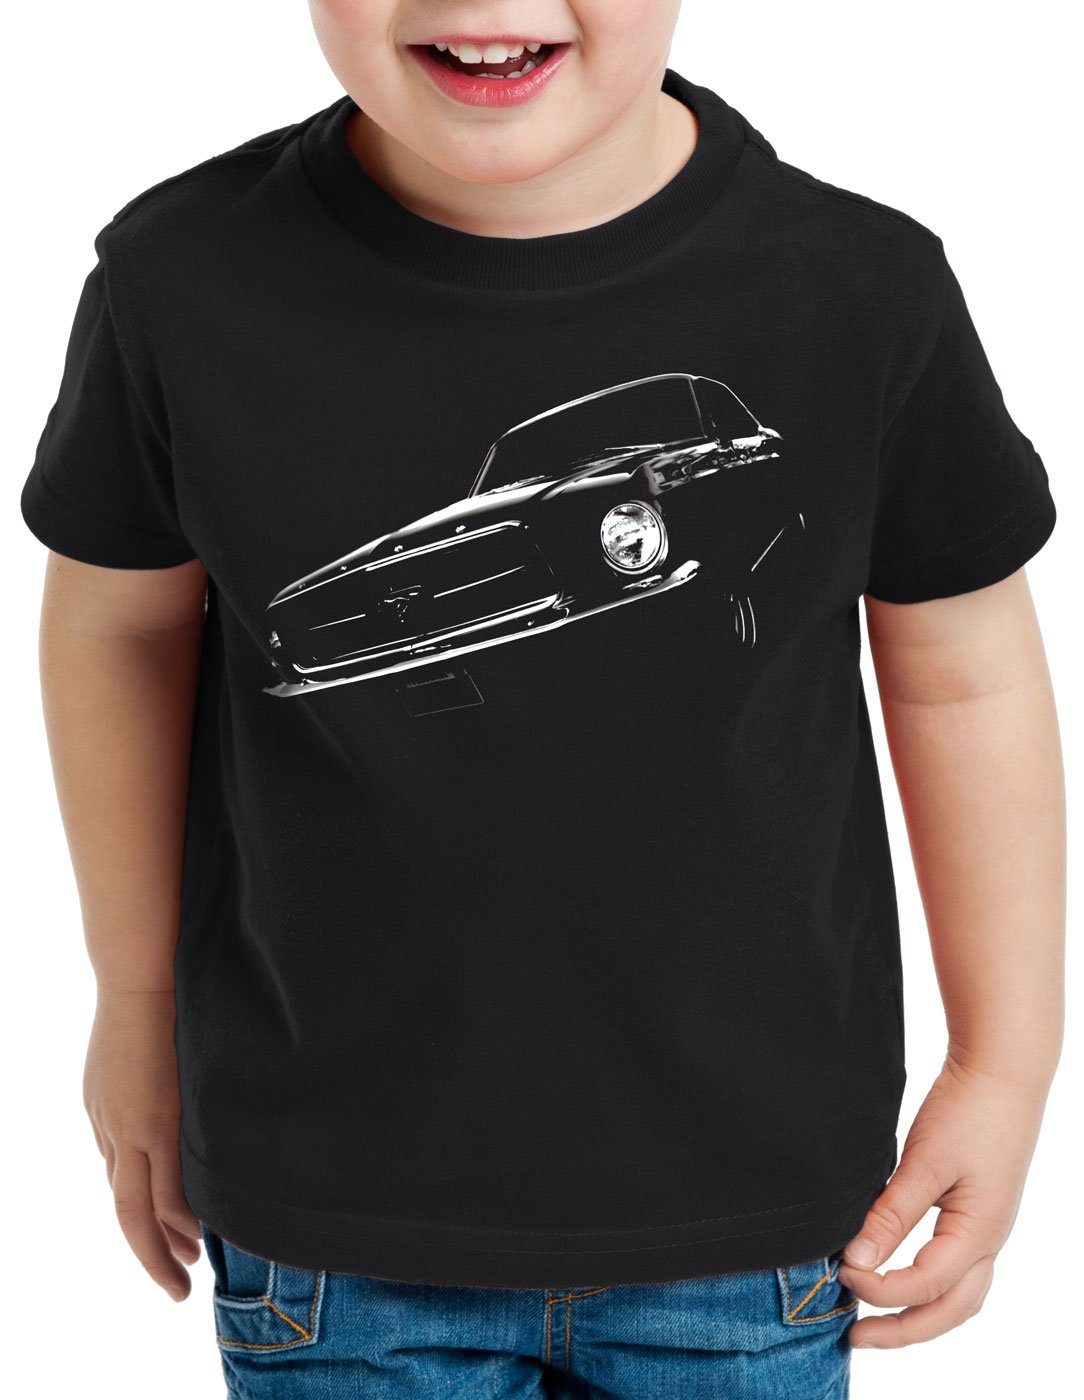 style3 Print-Shirt Kinder T-Shirt Classic Pony Car muscle mustang